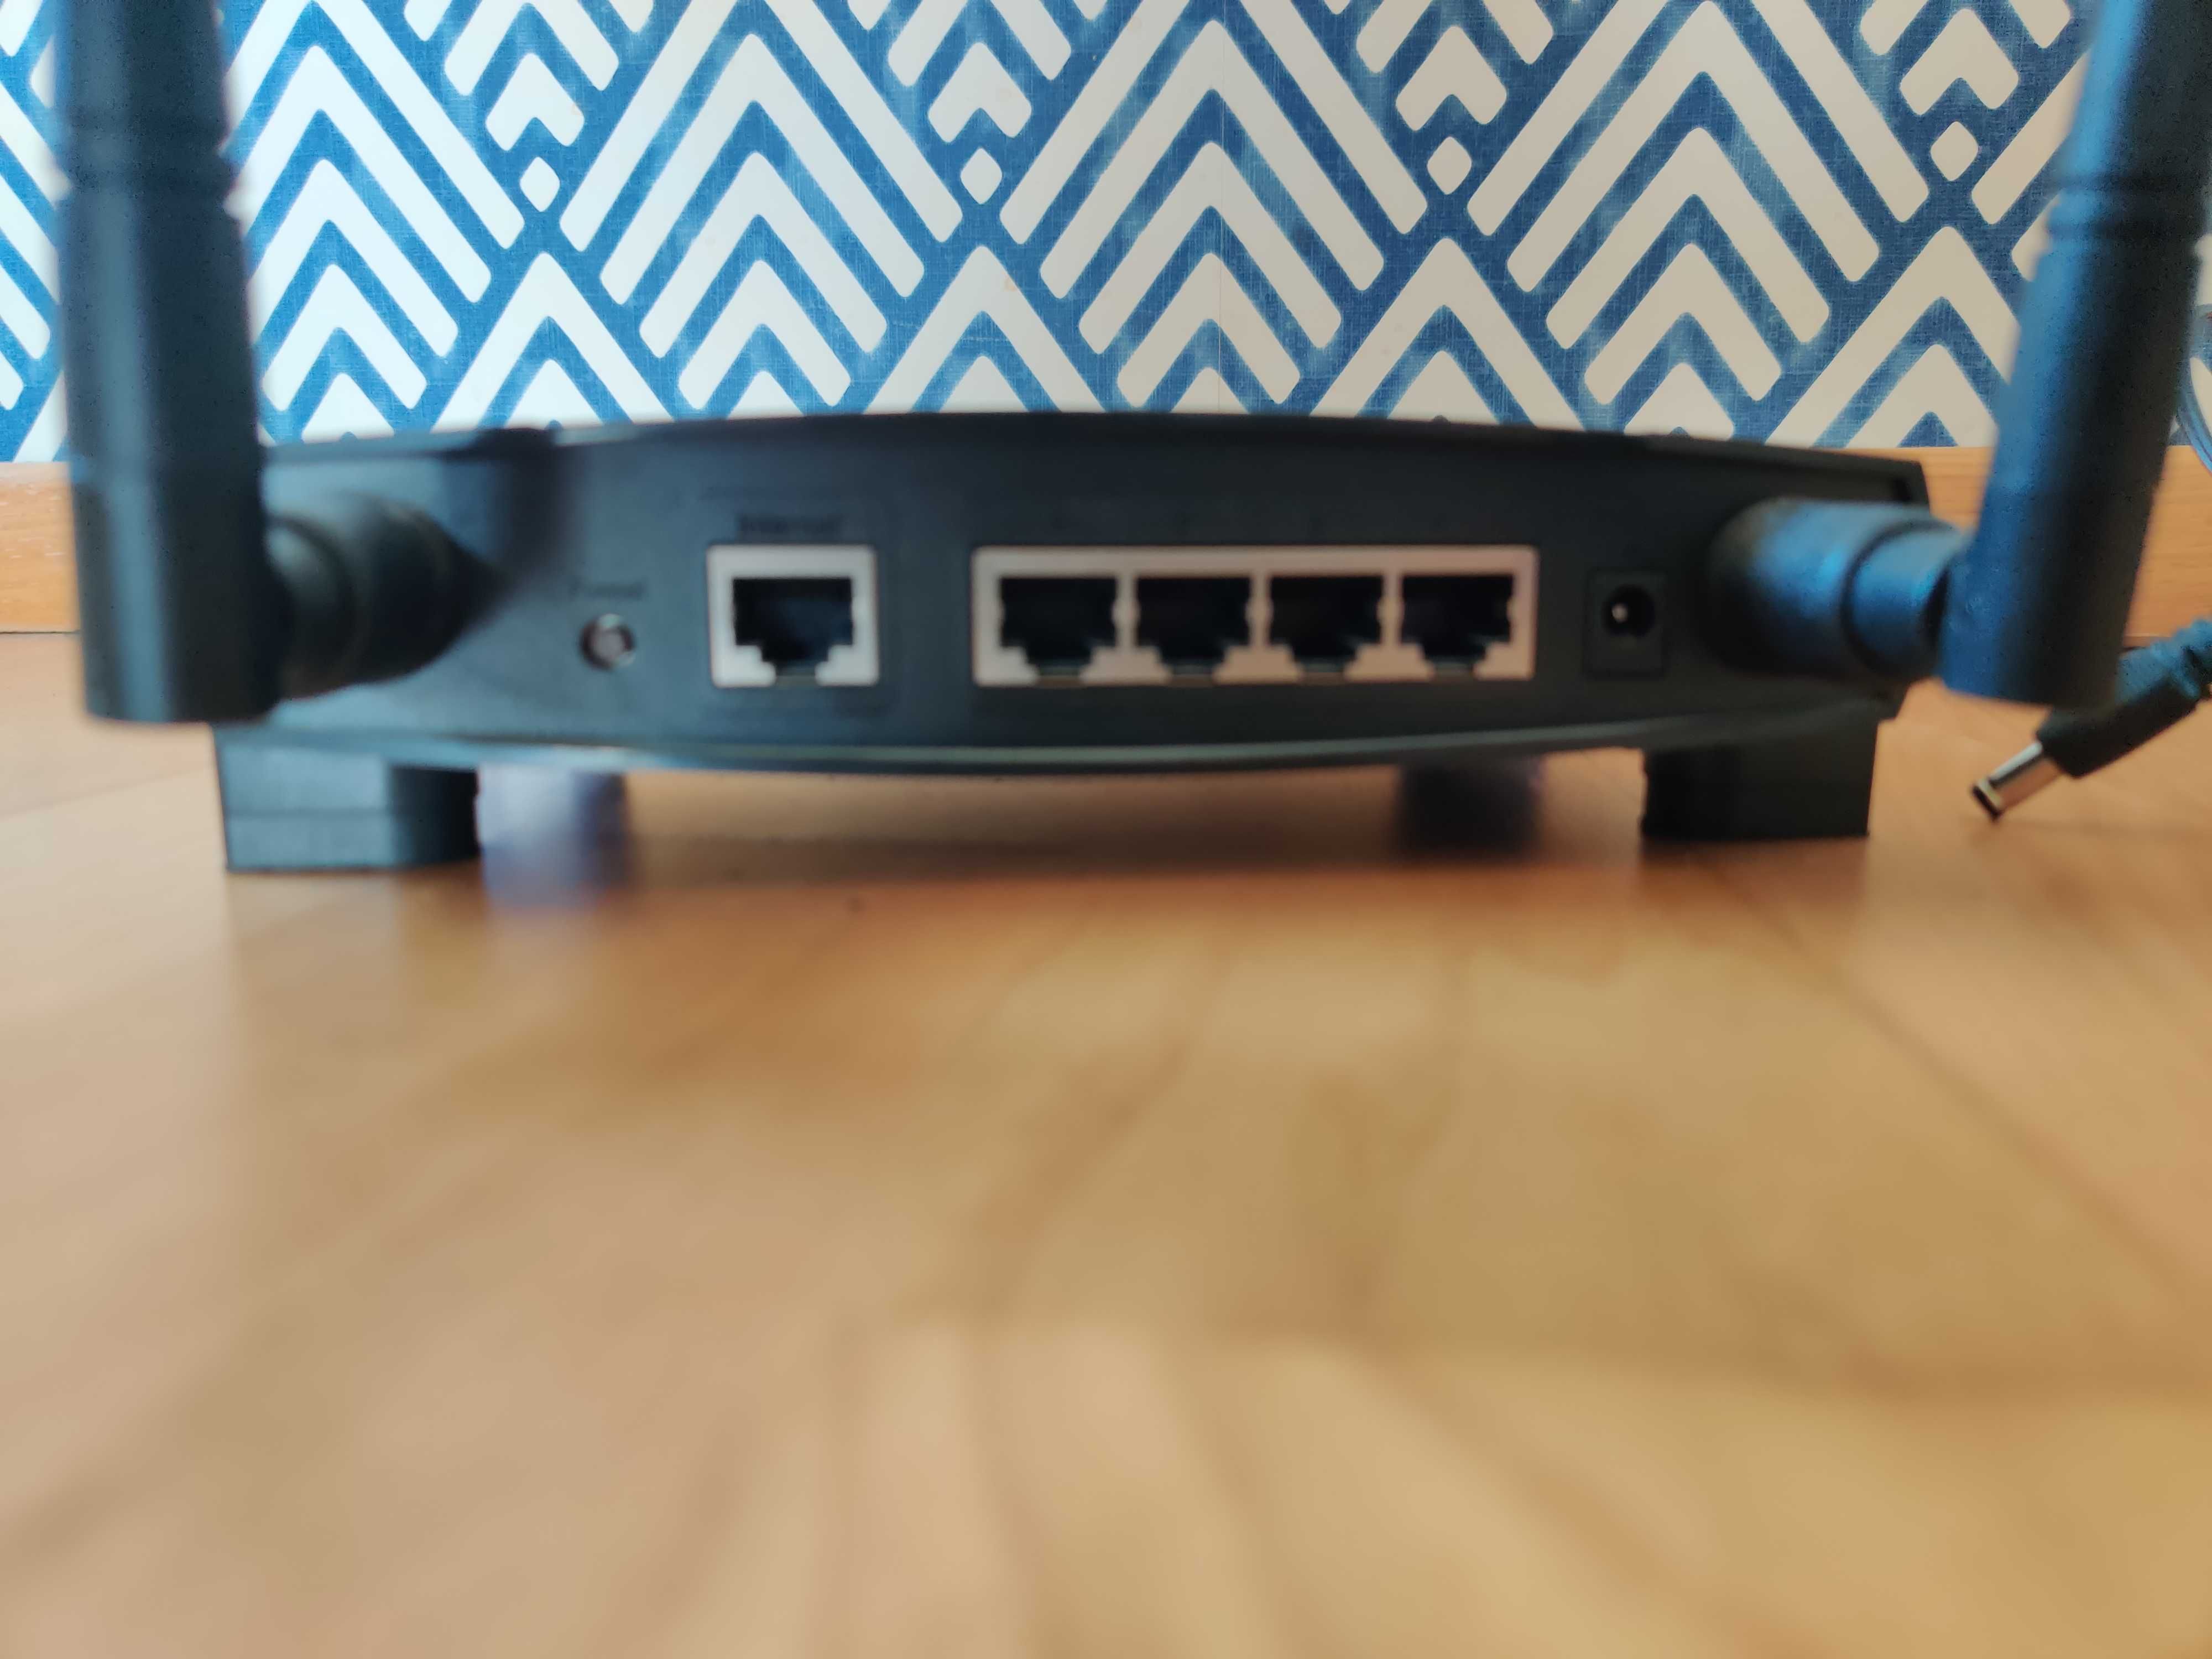 Router Linksys WRT54GS